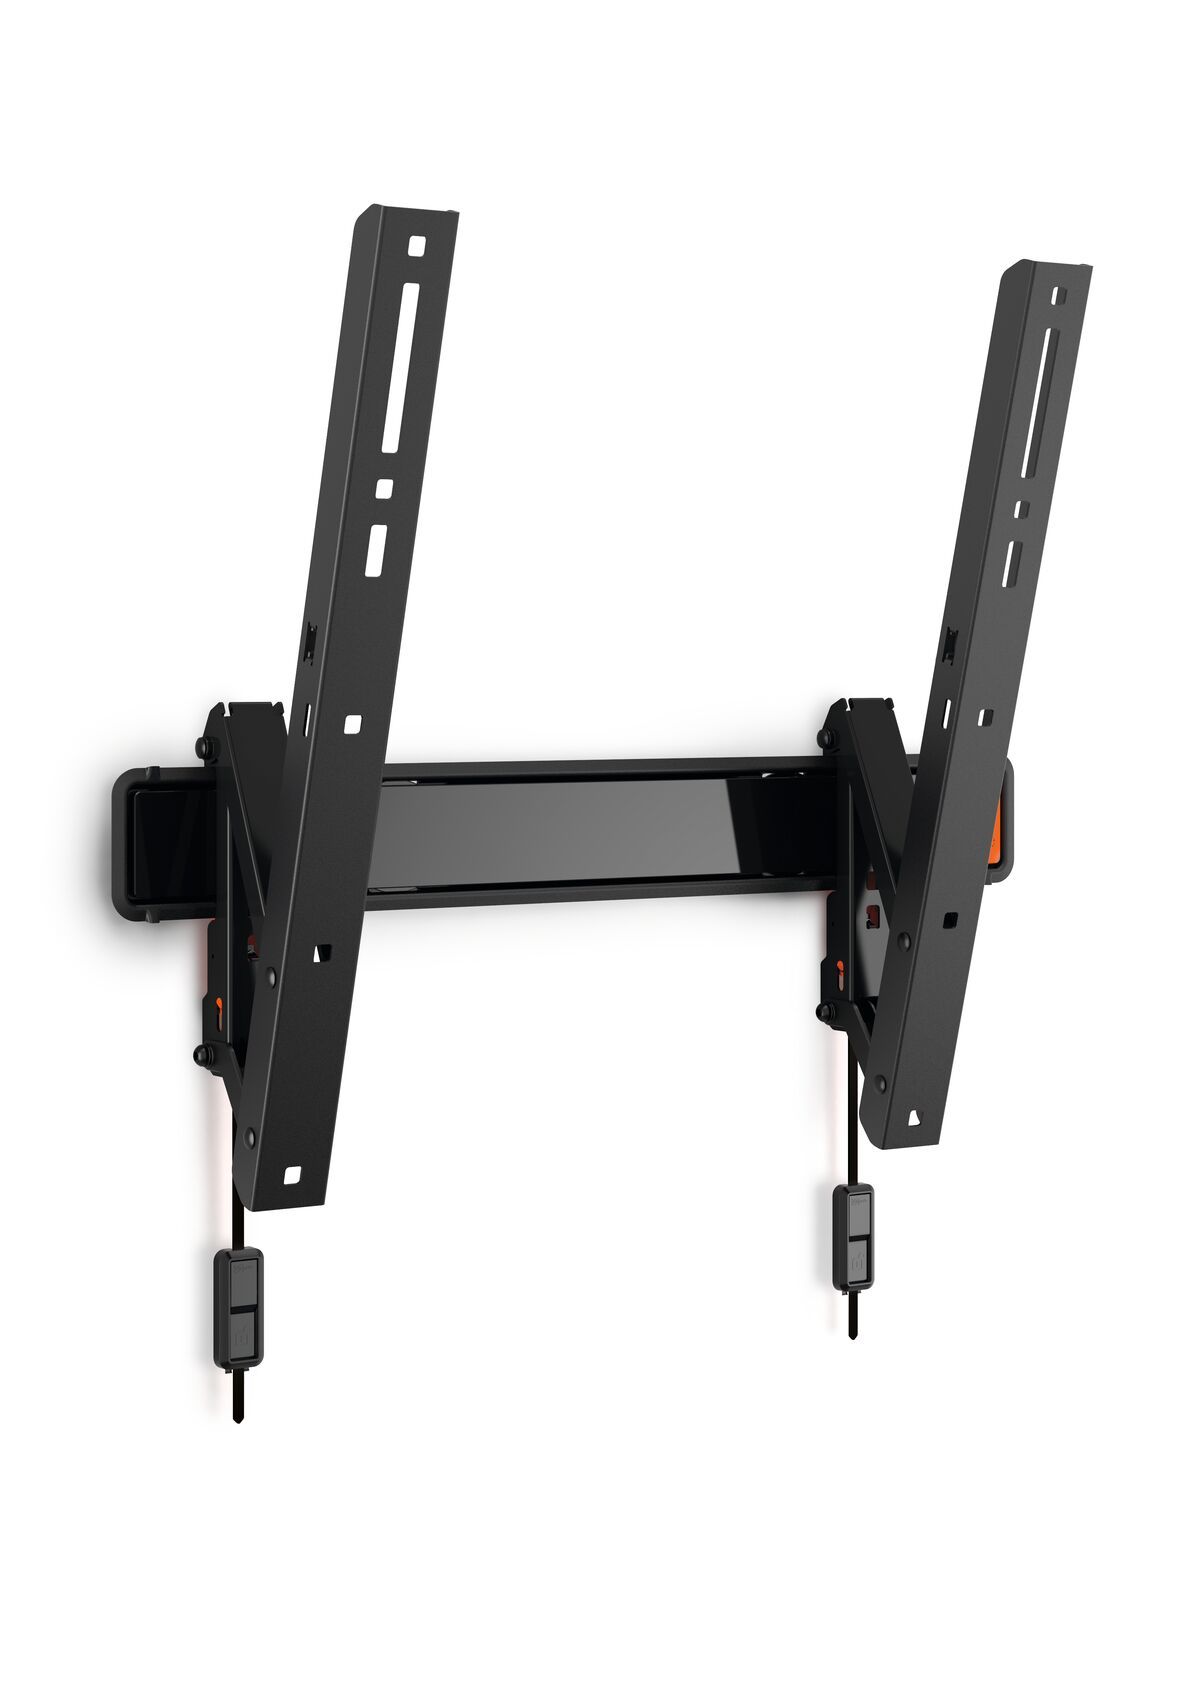 Vogel's WALL 2215 Tilting TV Wall Mount - Suitable for 32 up to 55 inch TVs up to Tilt up to 15° - Product